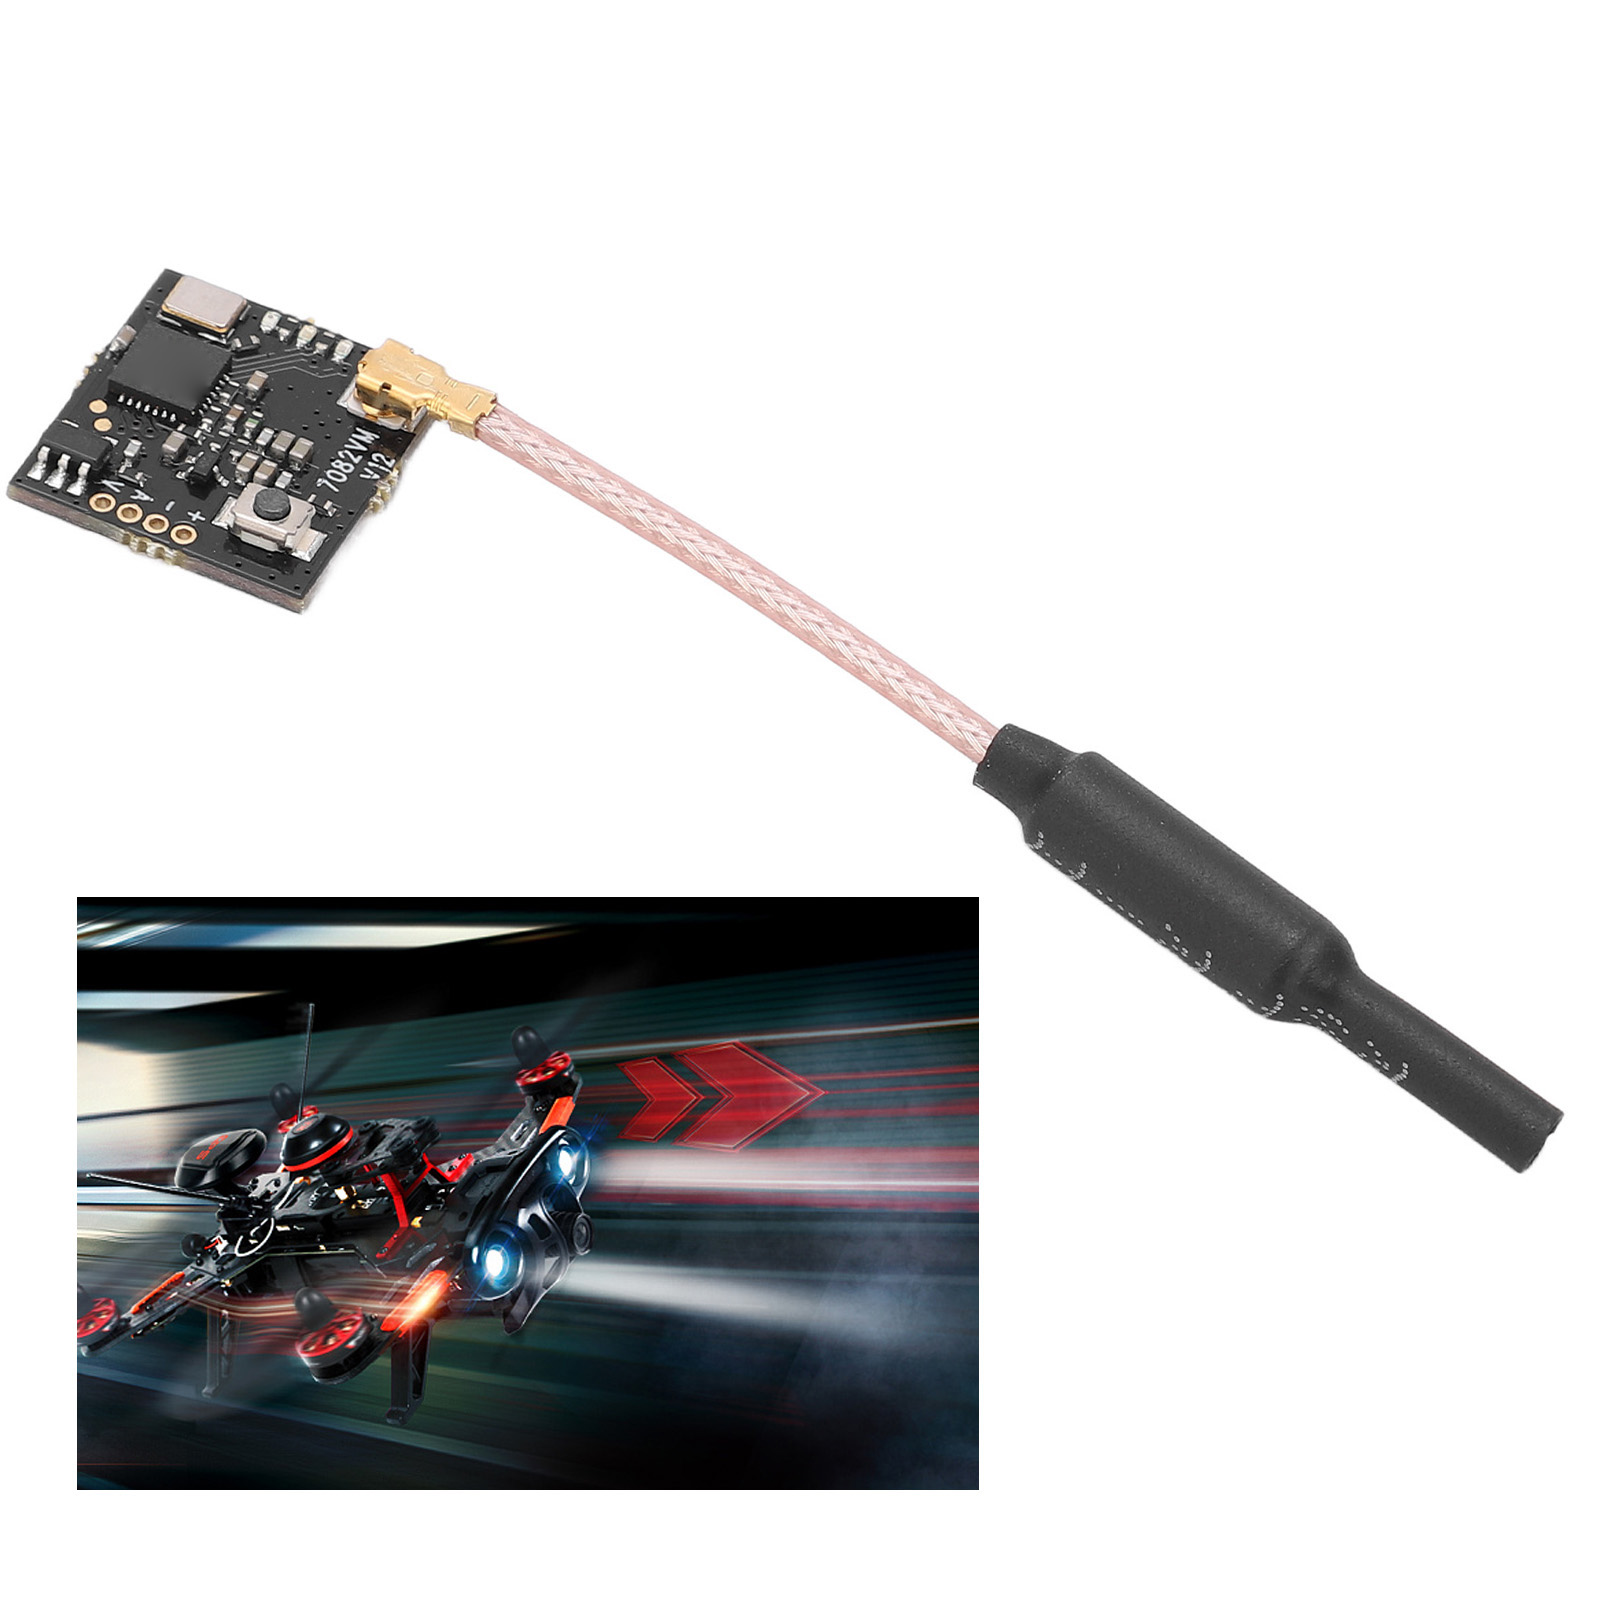 Convenient FPV Transmitter for Home and Outdoor